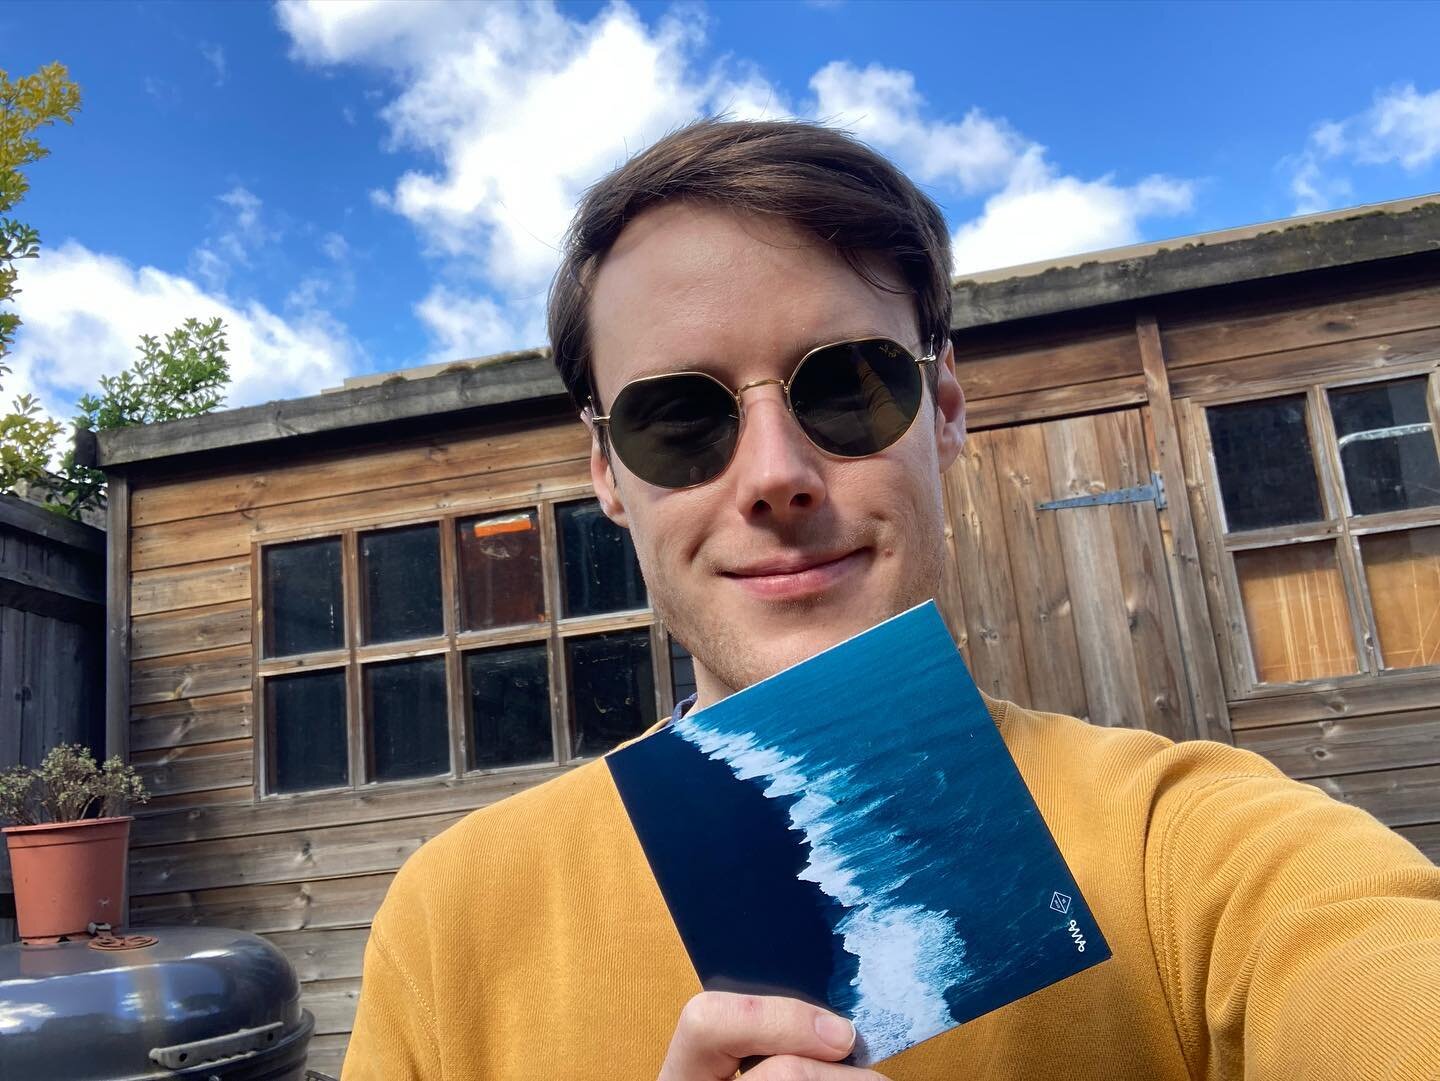 After having the initial idea of writing and recording an album sometime in 2021 it feels wild to be holding these in the flesh. So happy with how they turned out.

If you happen to want one or want to support me in what I do I&rsquo;ve just made pre